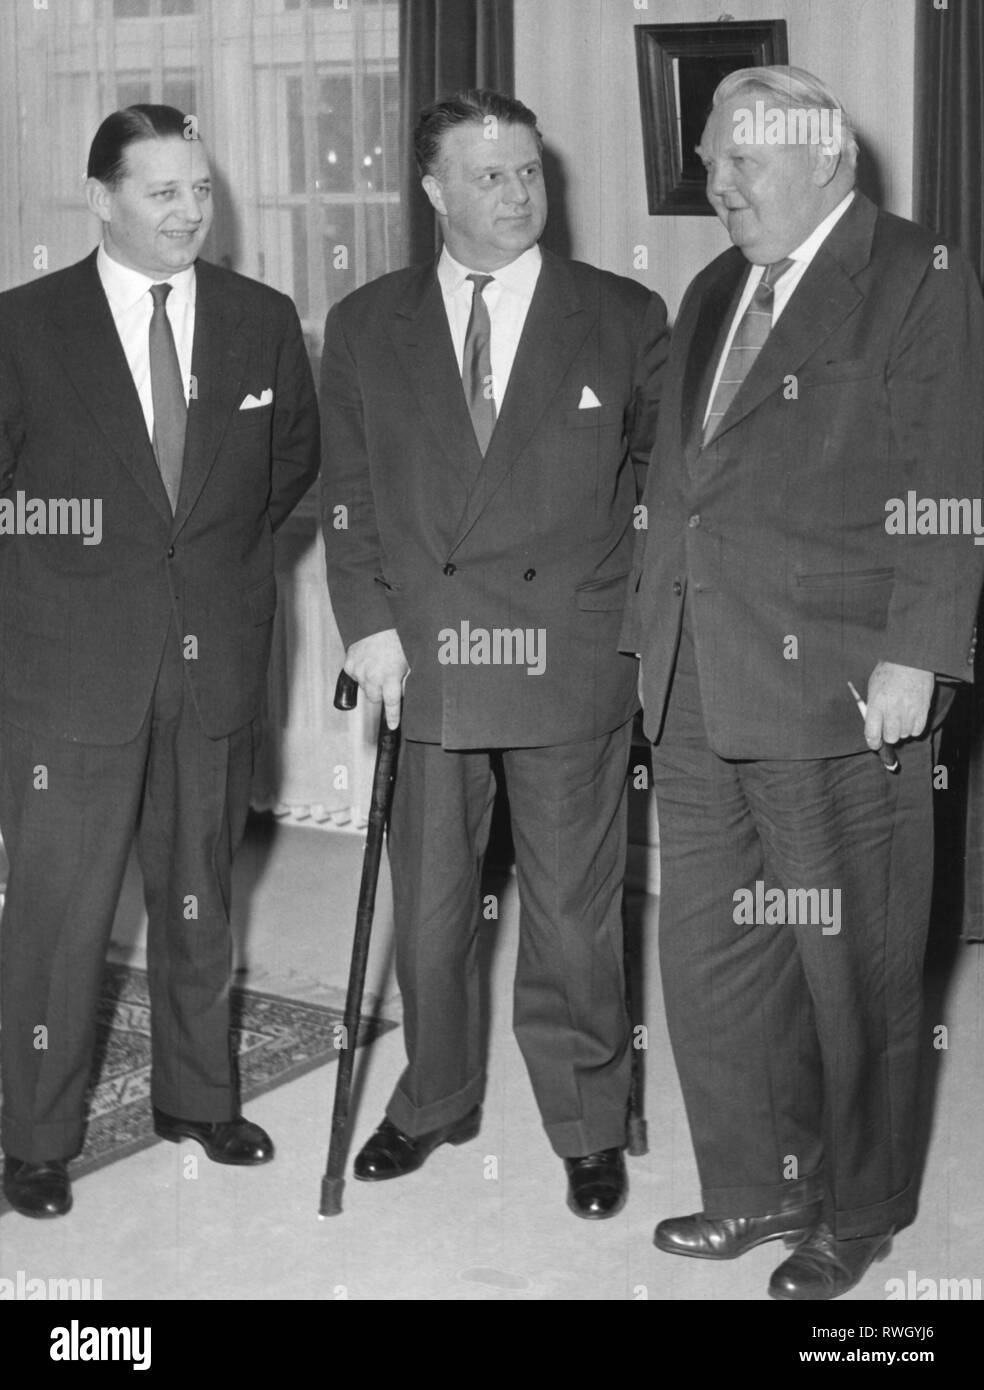 Reinert, Egon, 24.9.1908 - 23.4.1959, German politician (CDU), Prime Minister of the Saarland 4.6.1957 - 23.4.1959 (centre), at conversations about the incorporation of the Saarland to the economic area of the Federal Republic of Germany, with the Saarland minister of finance Manfred Schaefer (left) and Federal Minister of Economy Ludwig Erhard (right), Bonn, 21.1.1958, Additional-Rights-Clearance-Info-Not-Available Stock Photo